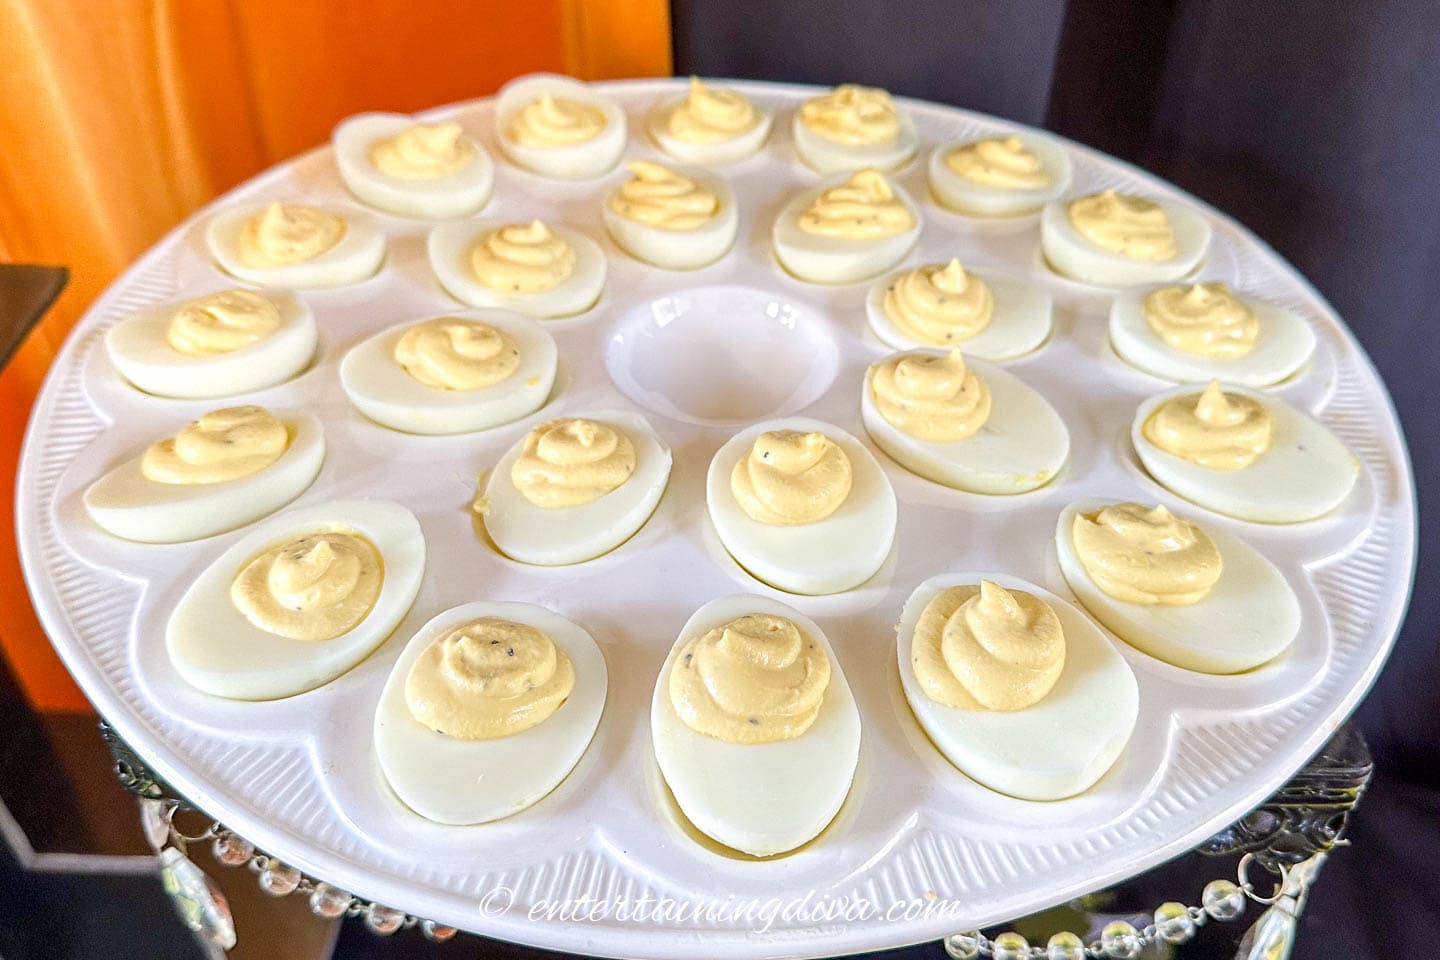 Classic deviled eggs on a deviled egg plate.